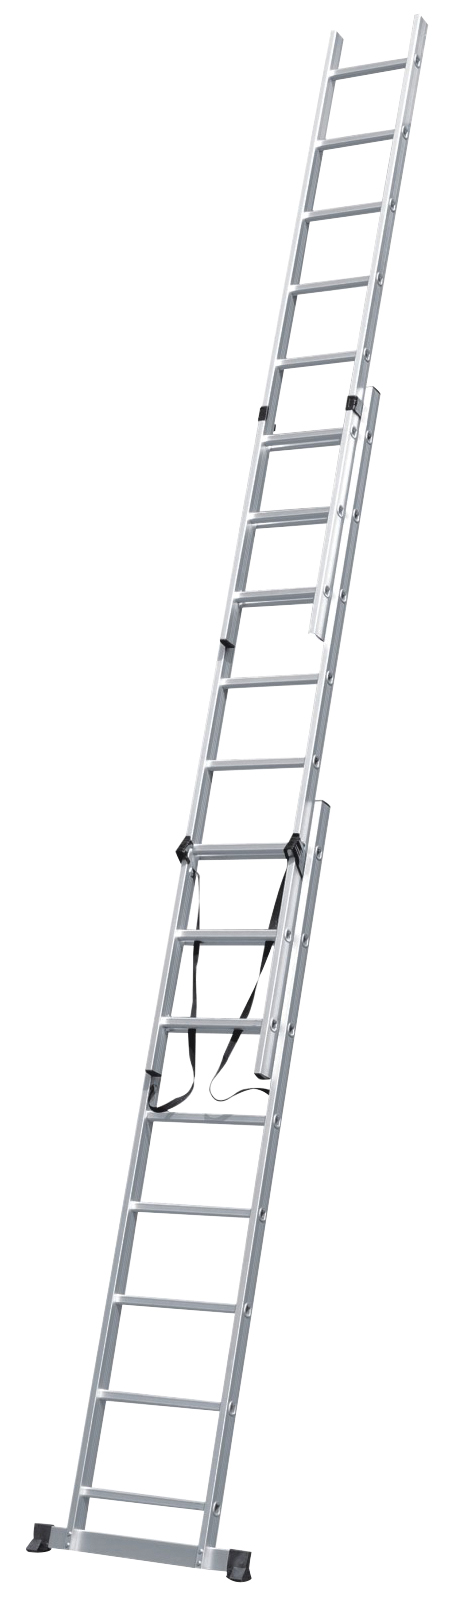 Triple Expendable Ladder 36 steps (3x12) Bulle - 1